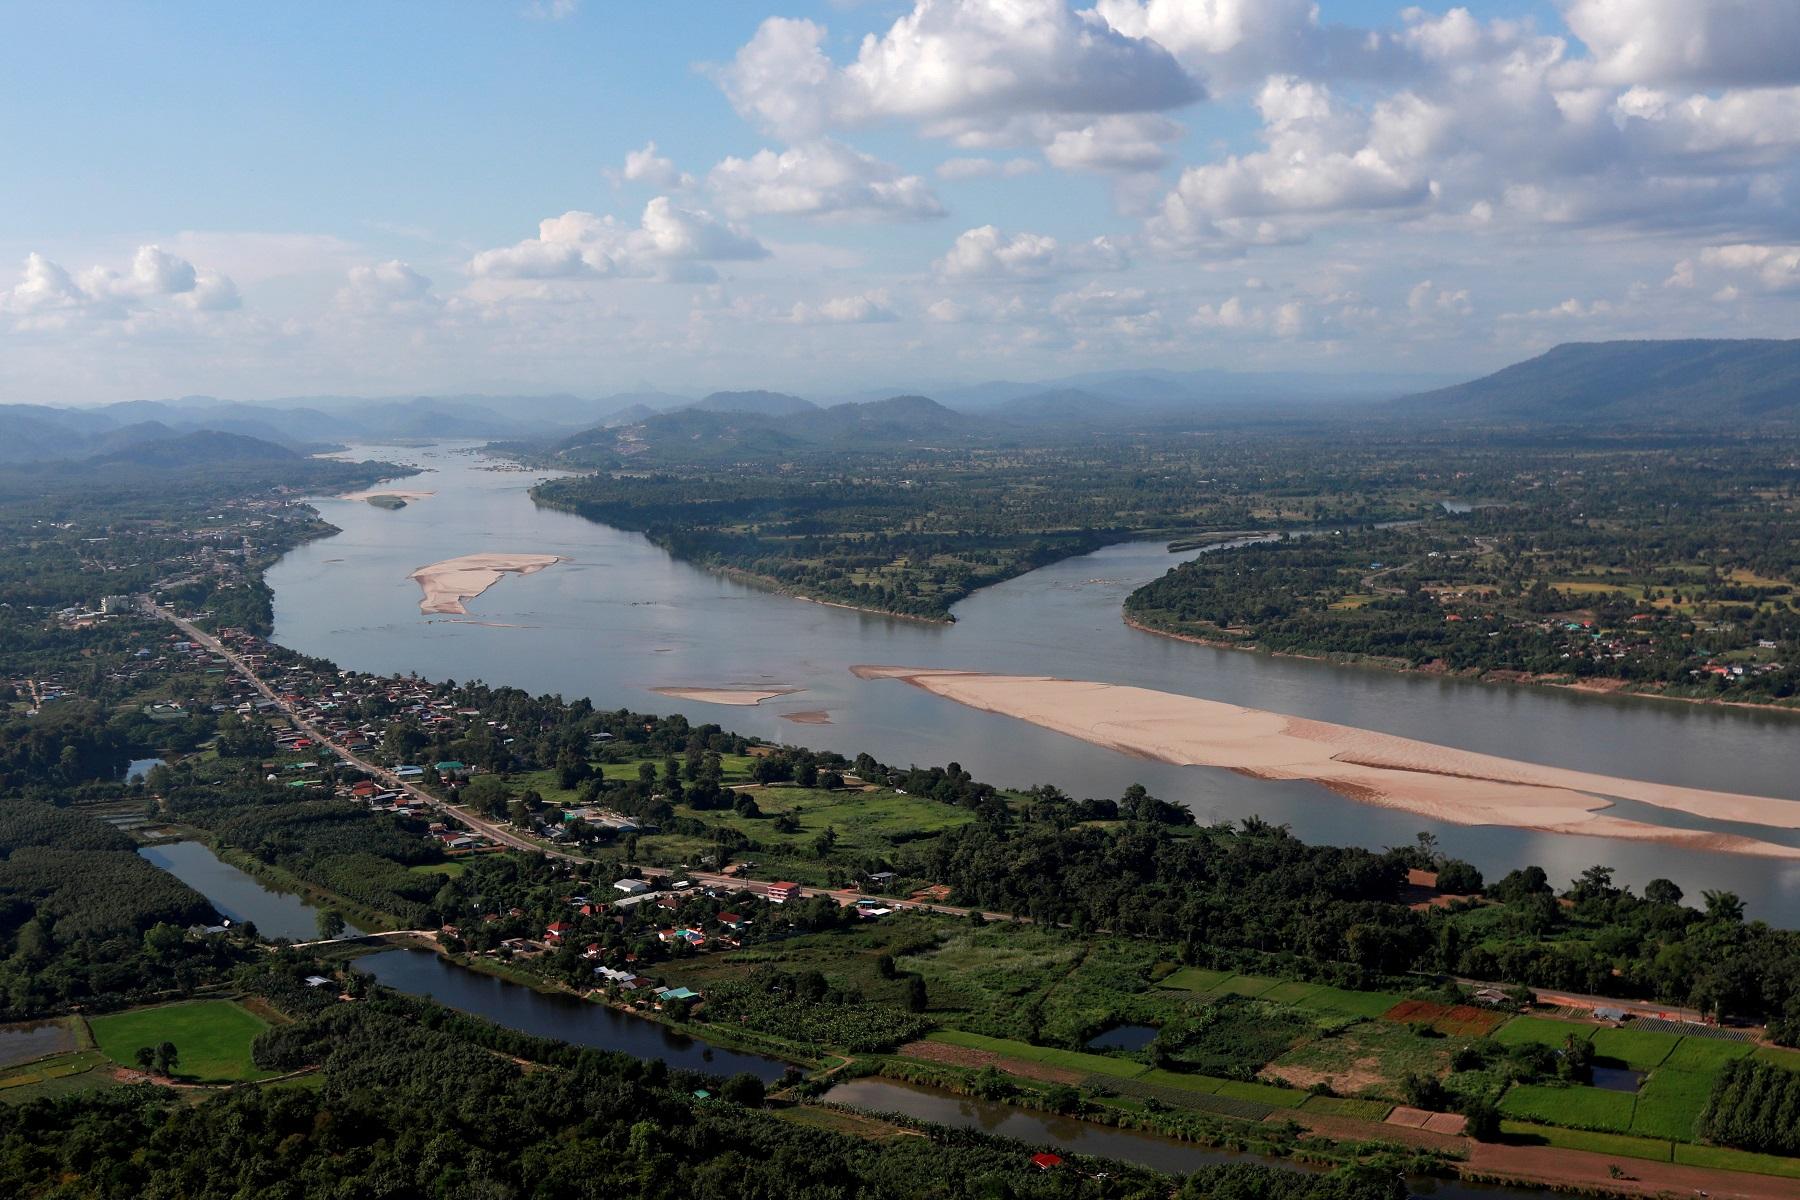 One-fifth of Mekong River fish species face extinction – report